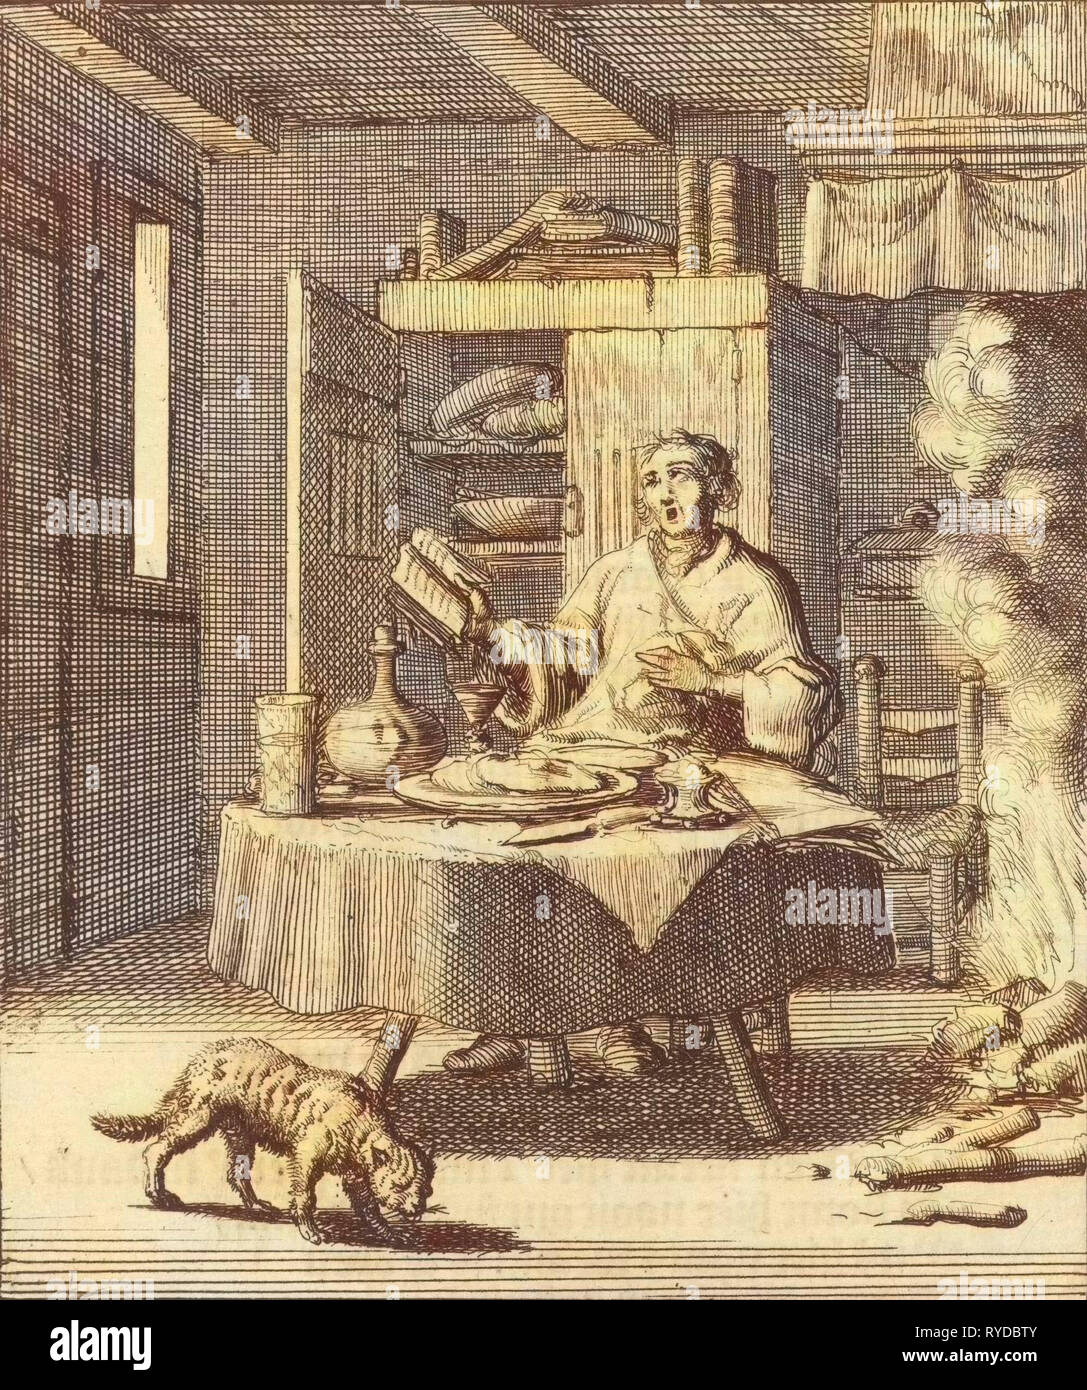 The writer William Shutter sits at a table and sings after meals from a Psalter, Jan Luyken, Gerbrandt Schagen, 1687 Stock Photo